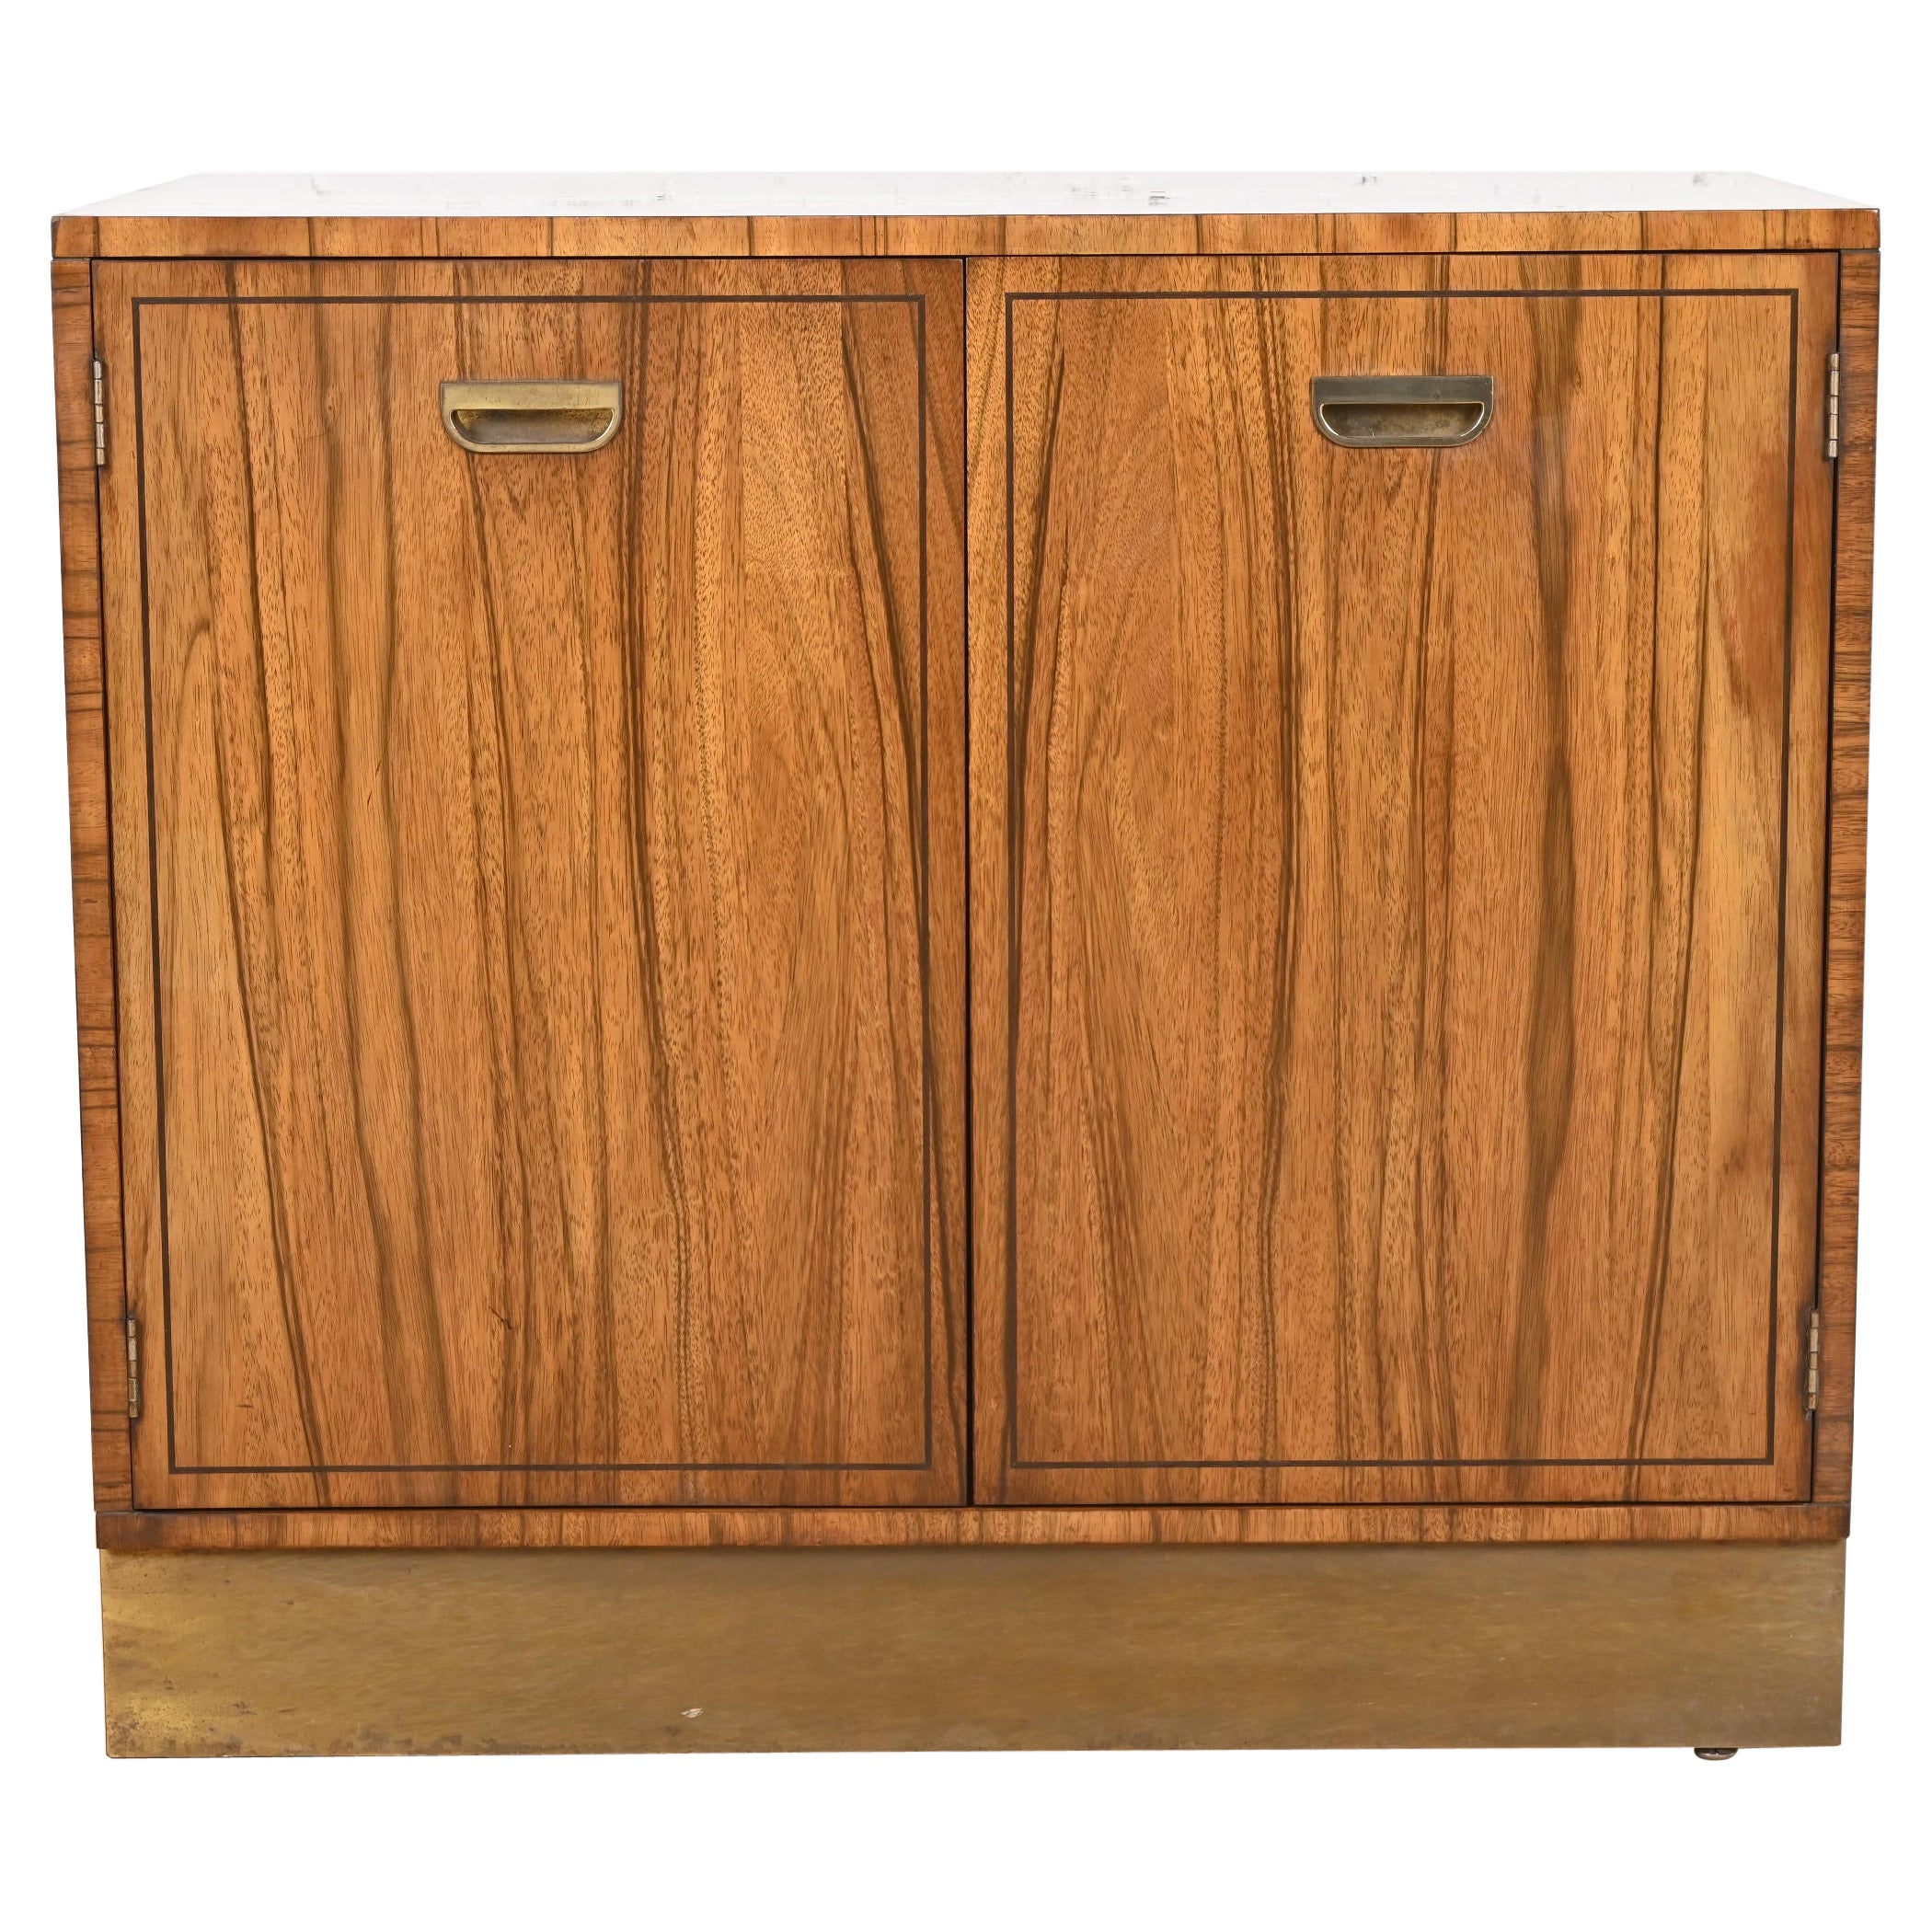 Baker Furniture Mid-Century Modern Campaign Rosewood Bar Cabinet, Circa 1960s For Sale